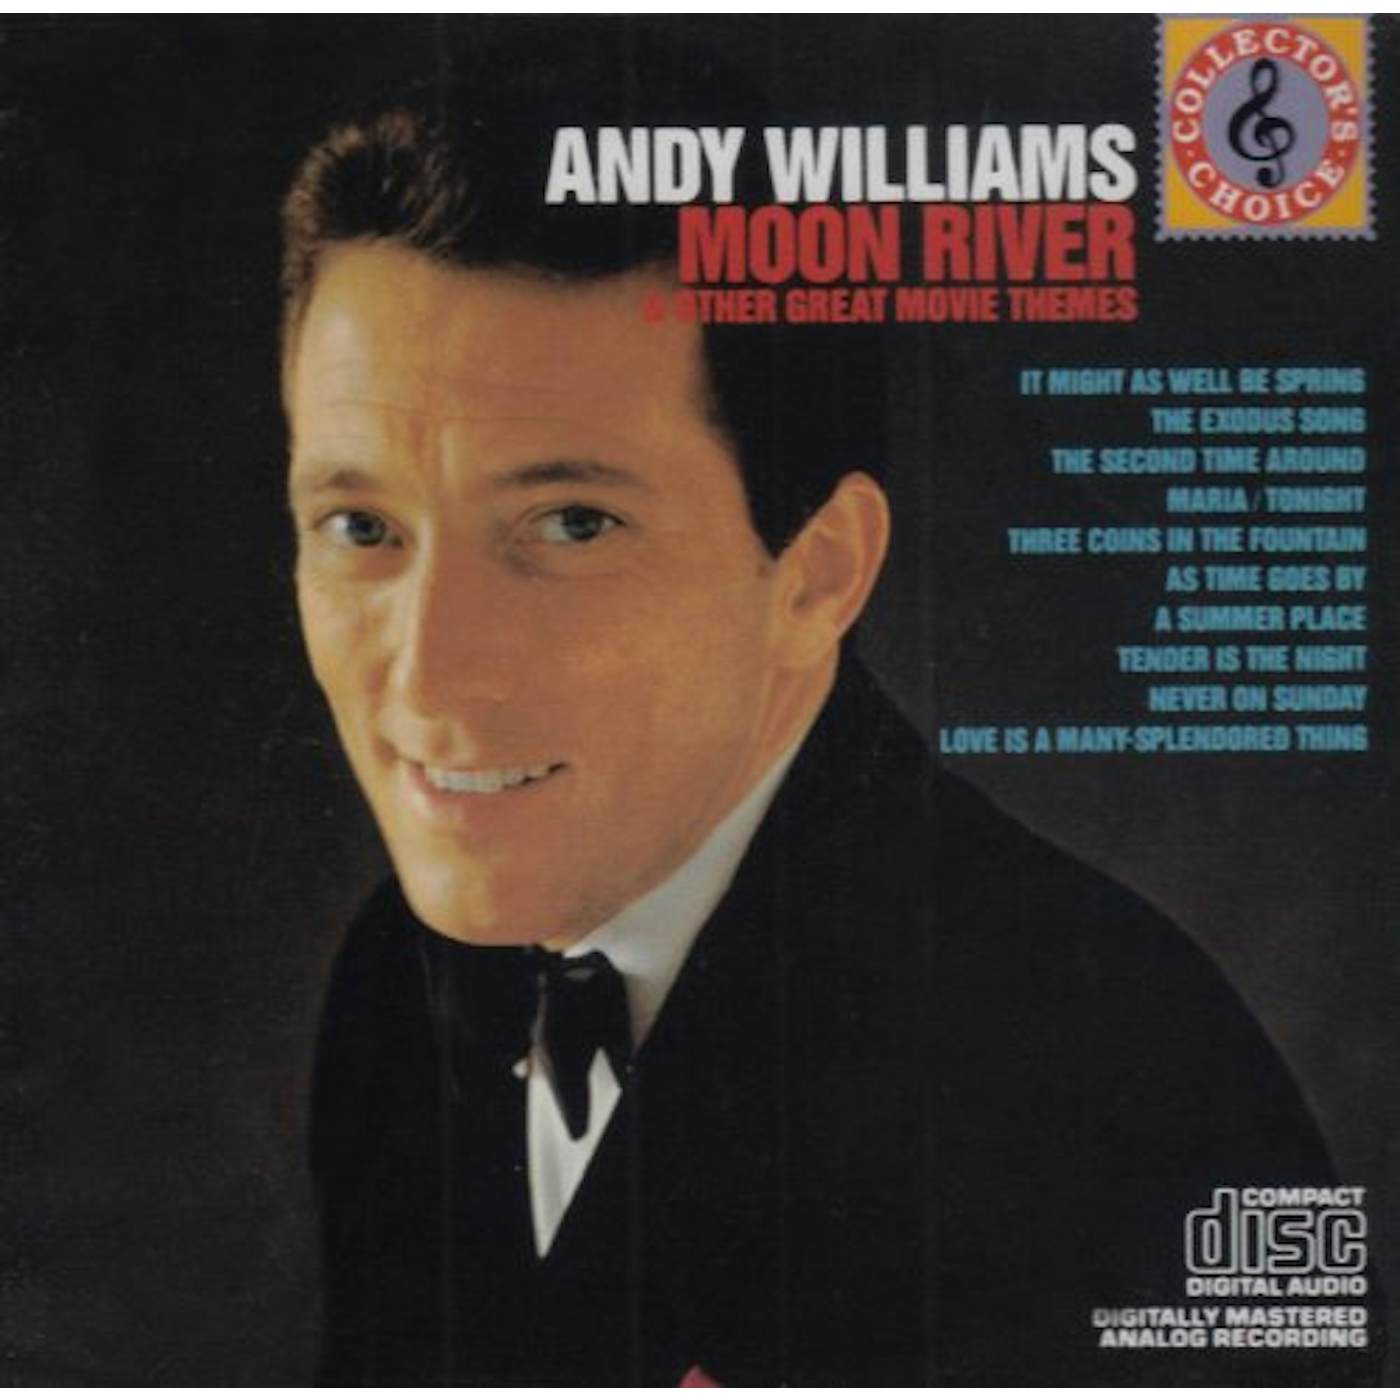 Andy Williams MOON RIVER CD